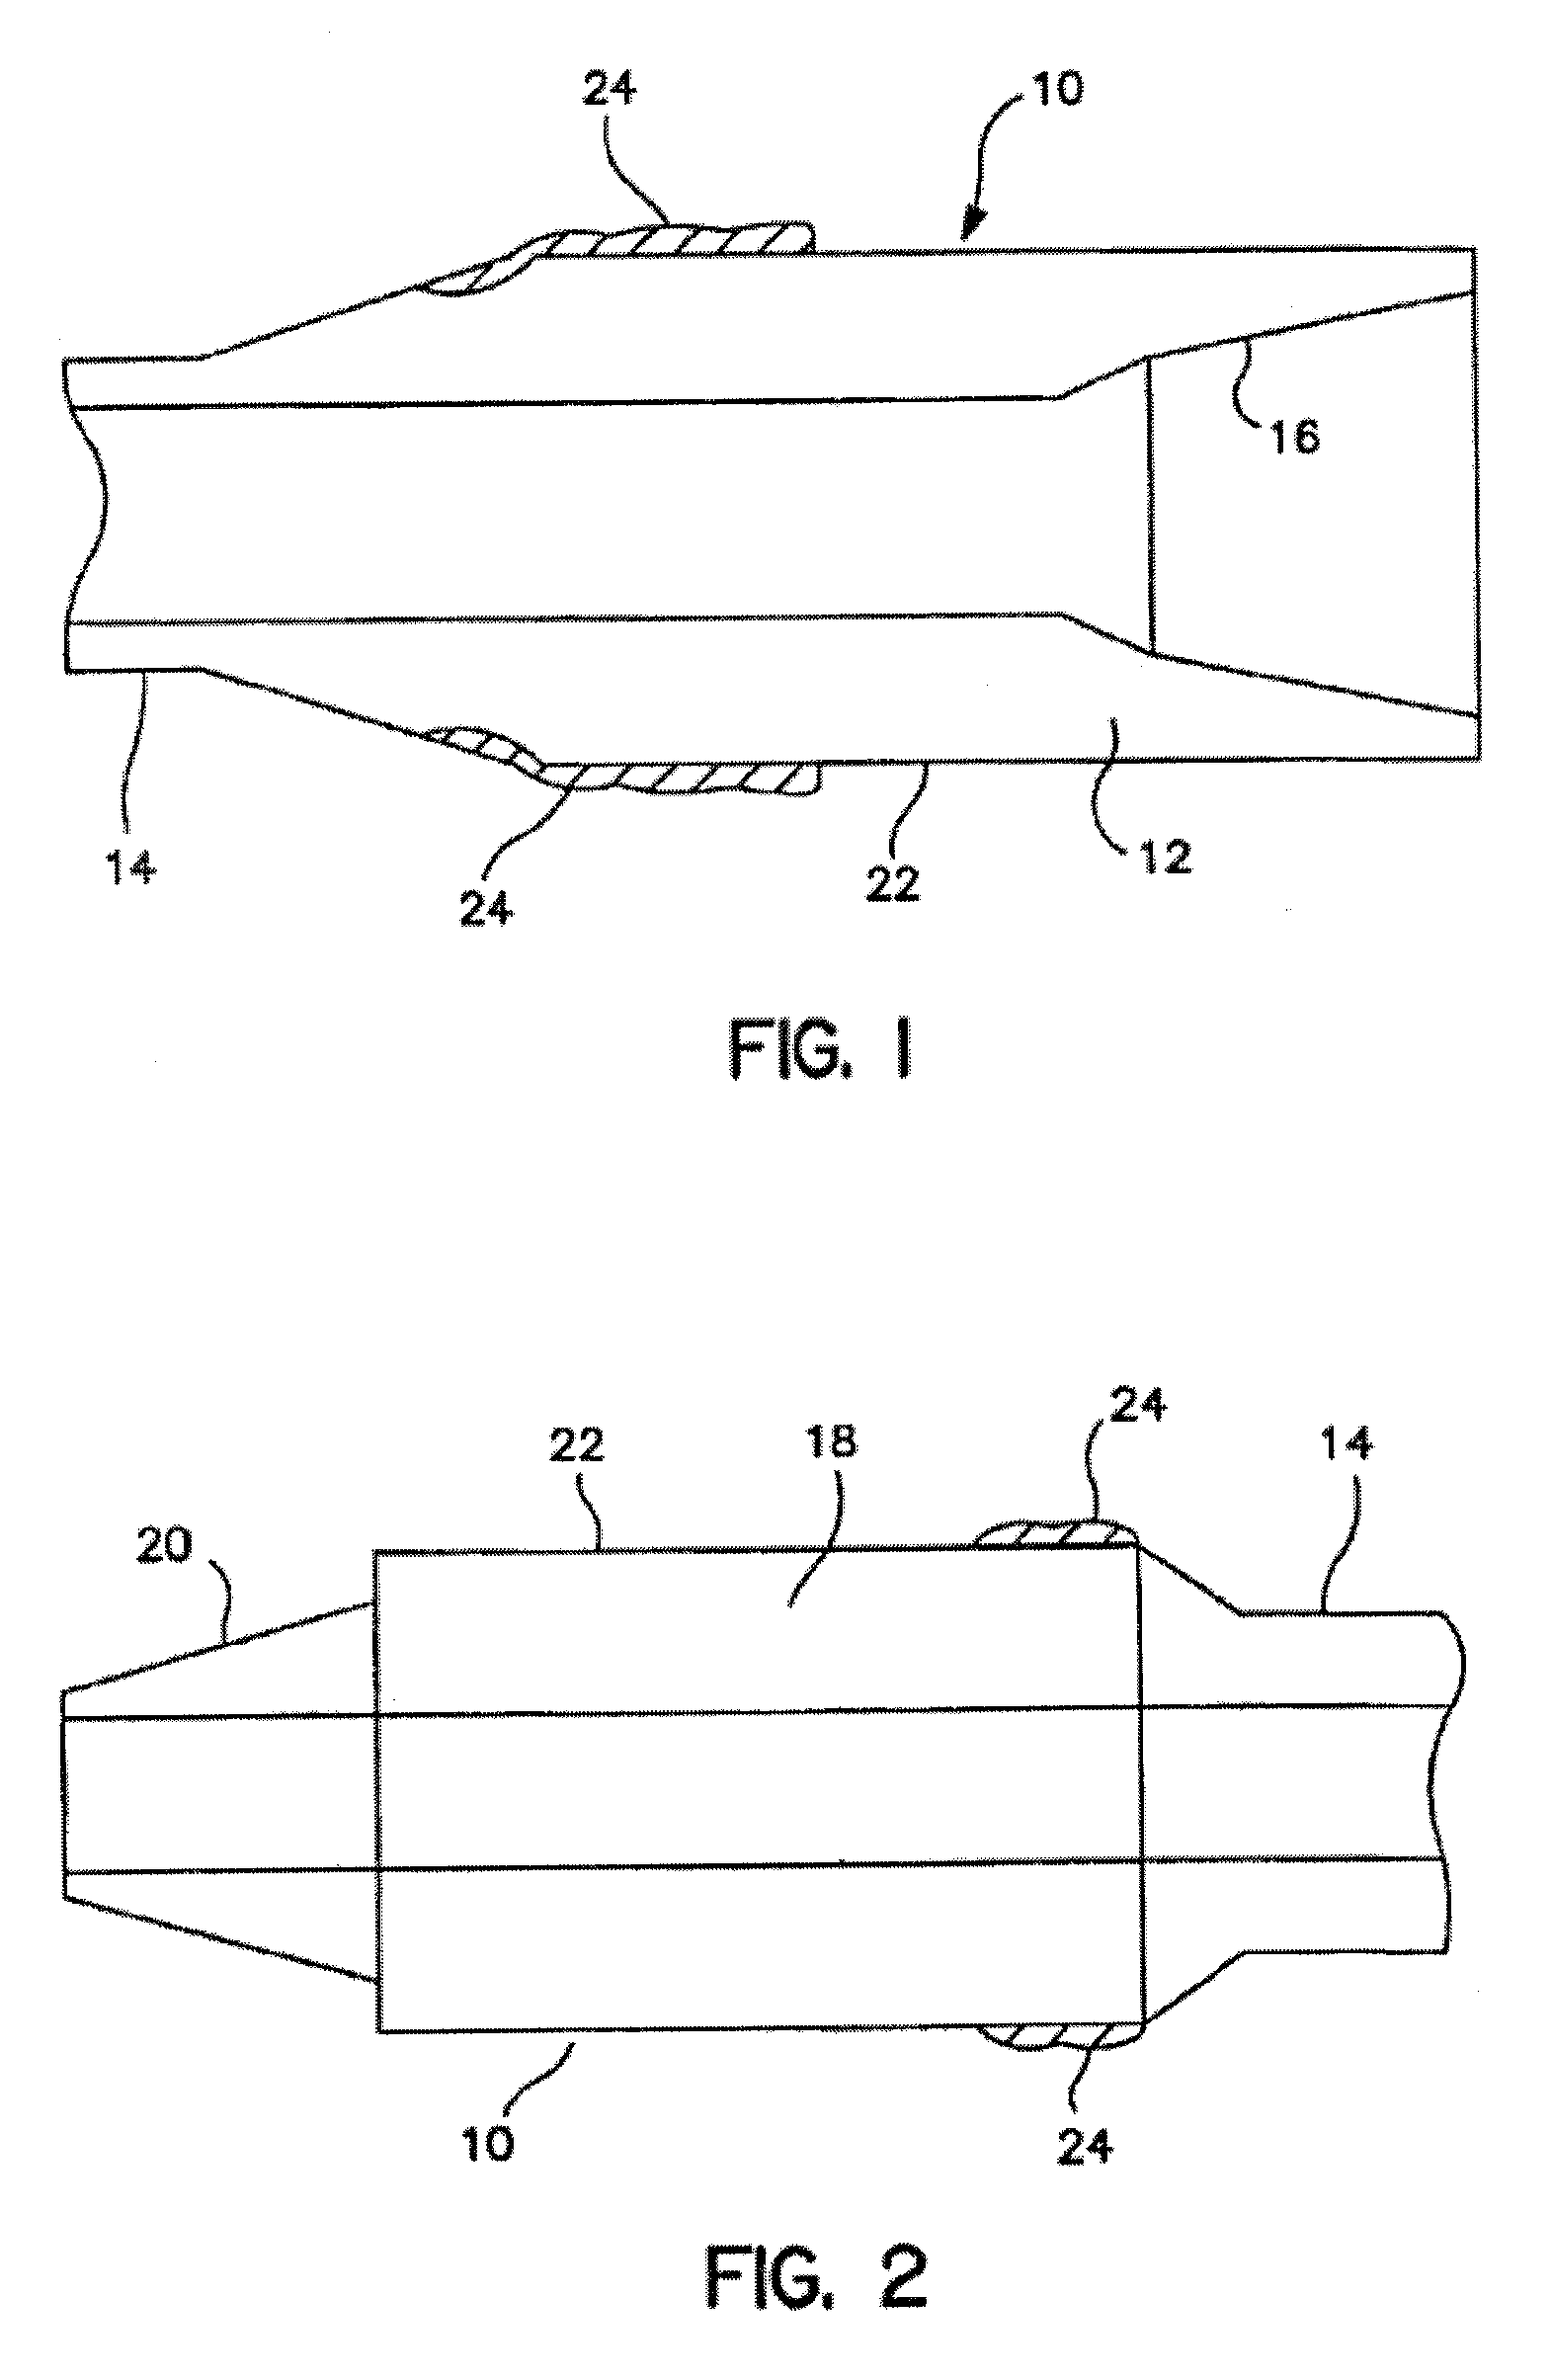 Methods of treating hardbanded joints of pipe using friction stir processing